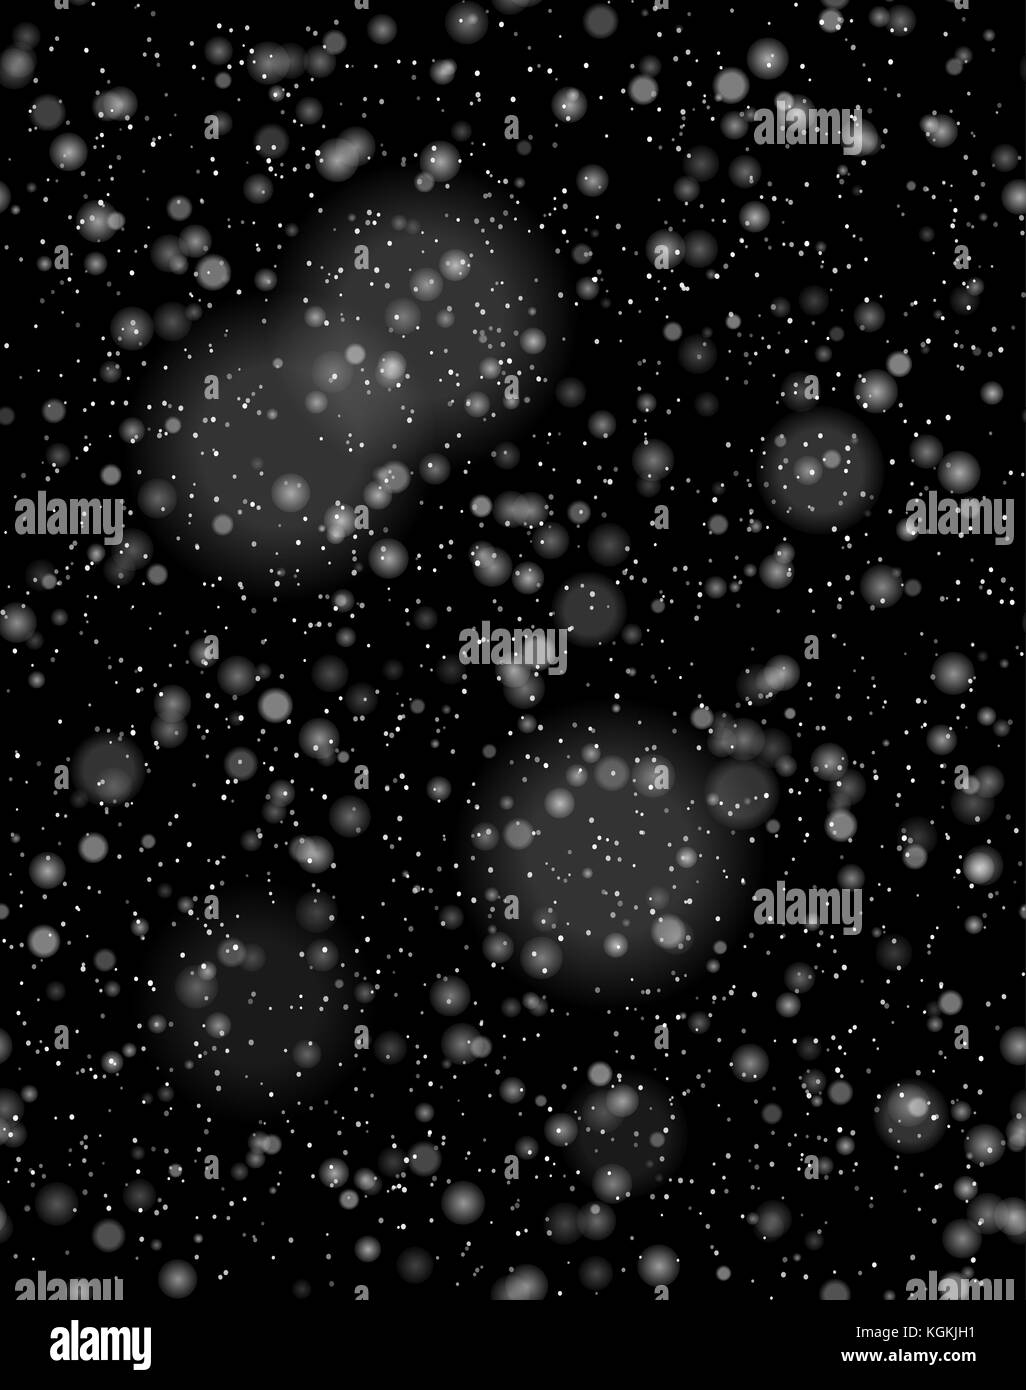 Seamless vector white snowfall effect on black background. Overlay snow flake Christmas or New Year winter effect. Stock Vector